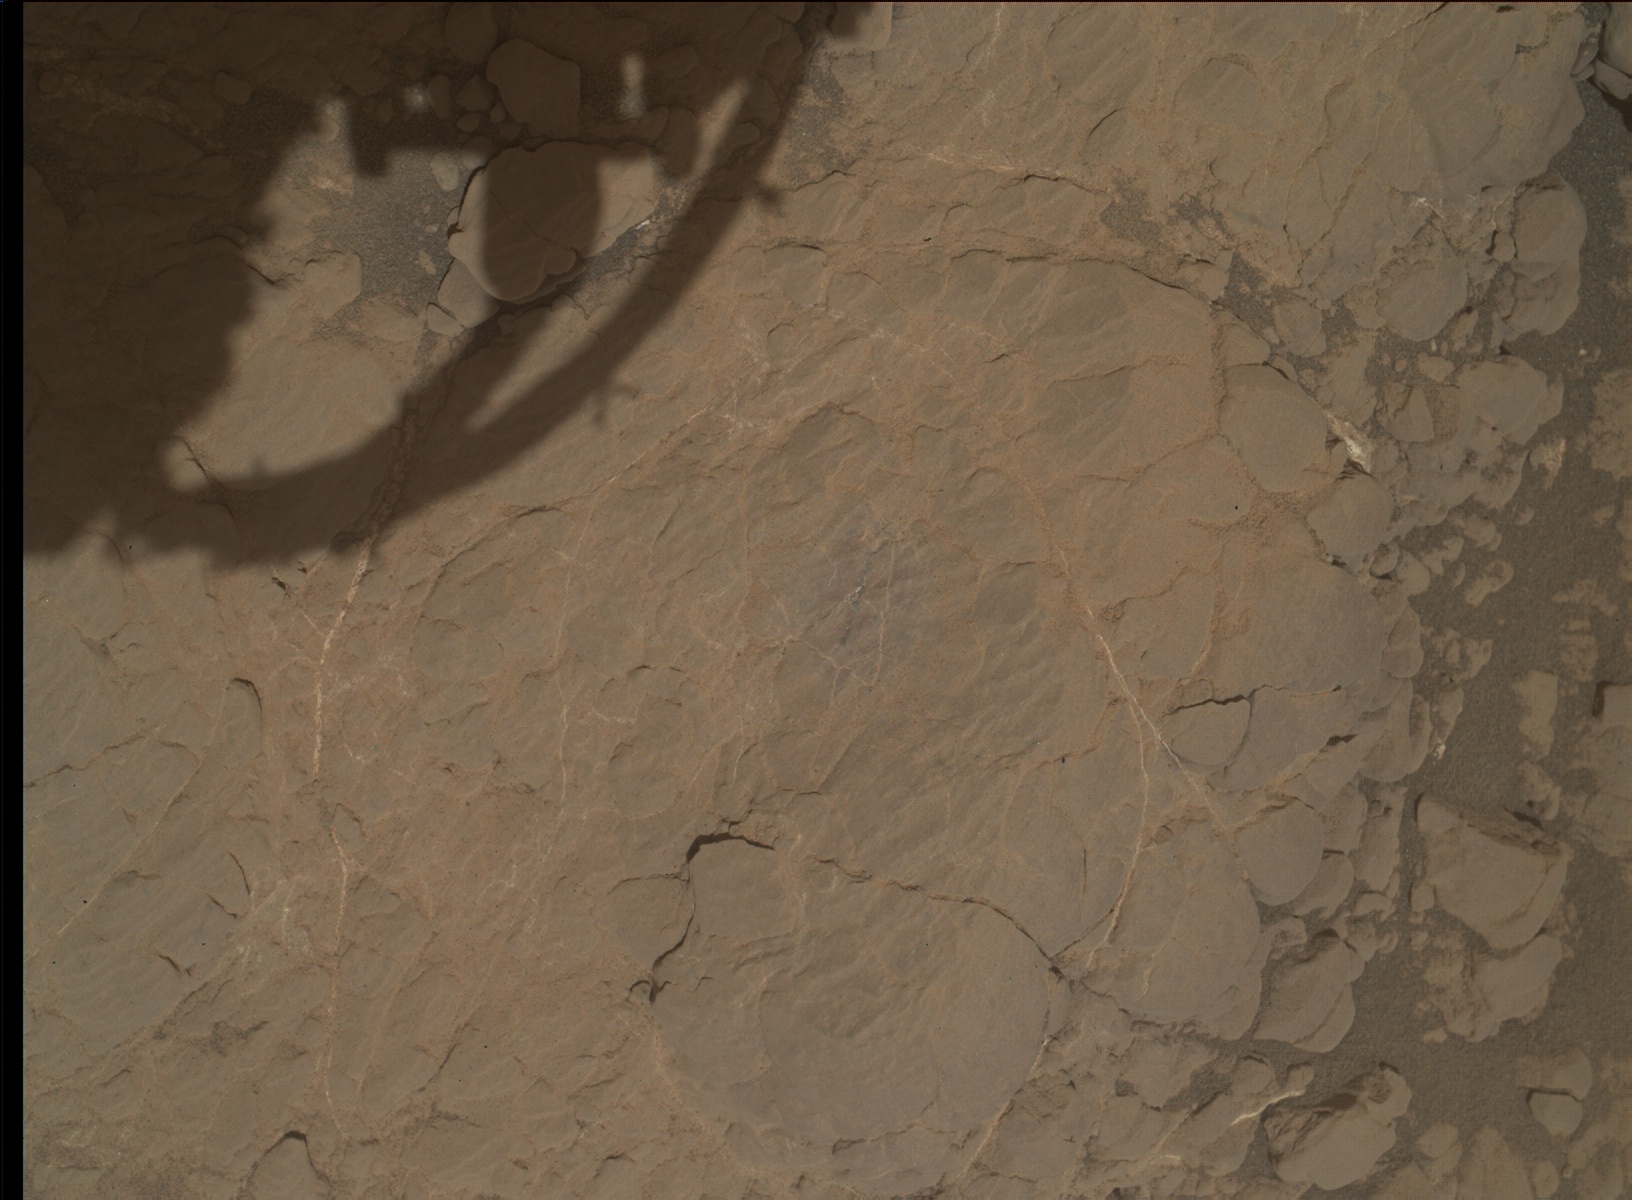 Nasa's Mars rover Curiosity acquired this image using its Mars Hand Lens Imager (MAHLI) on Sol 2590